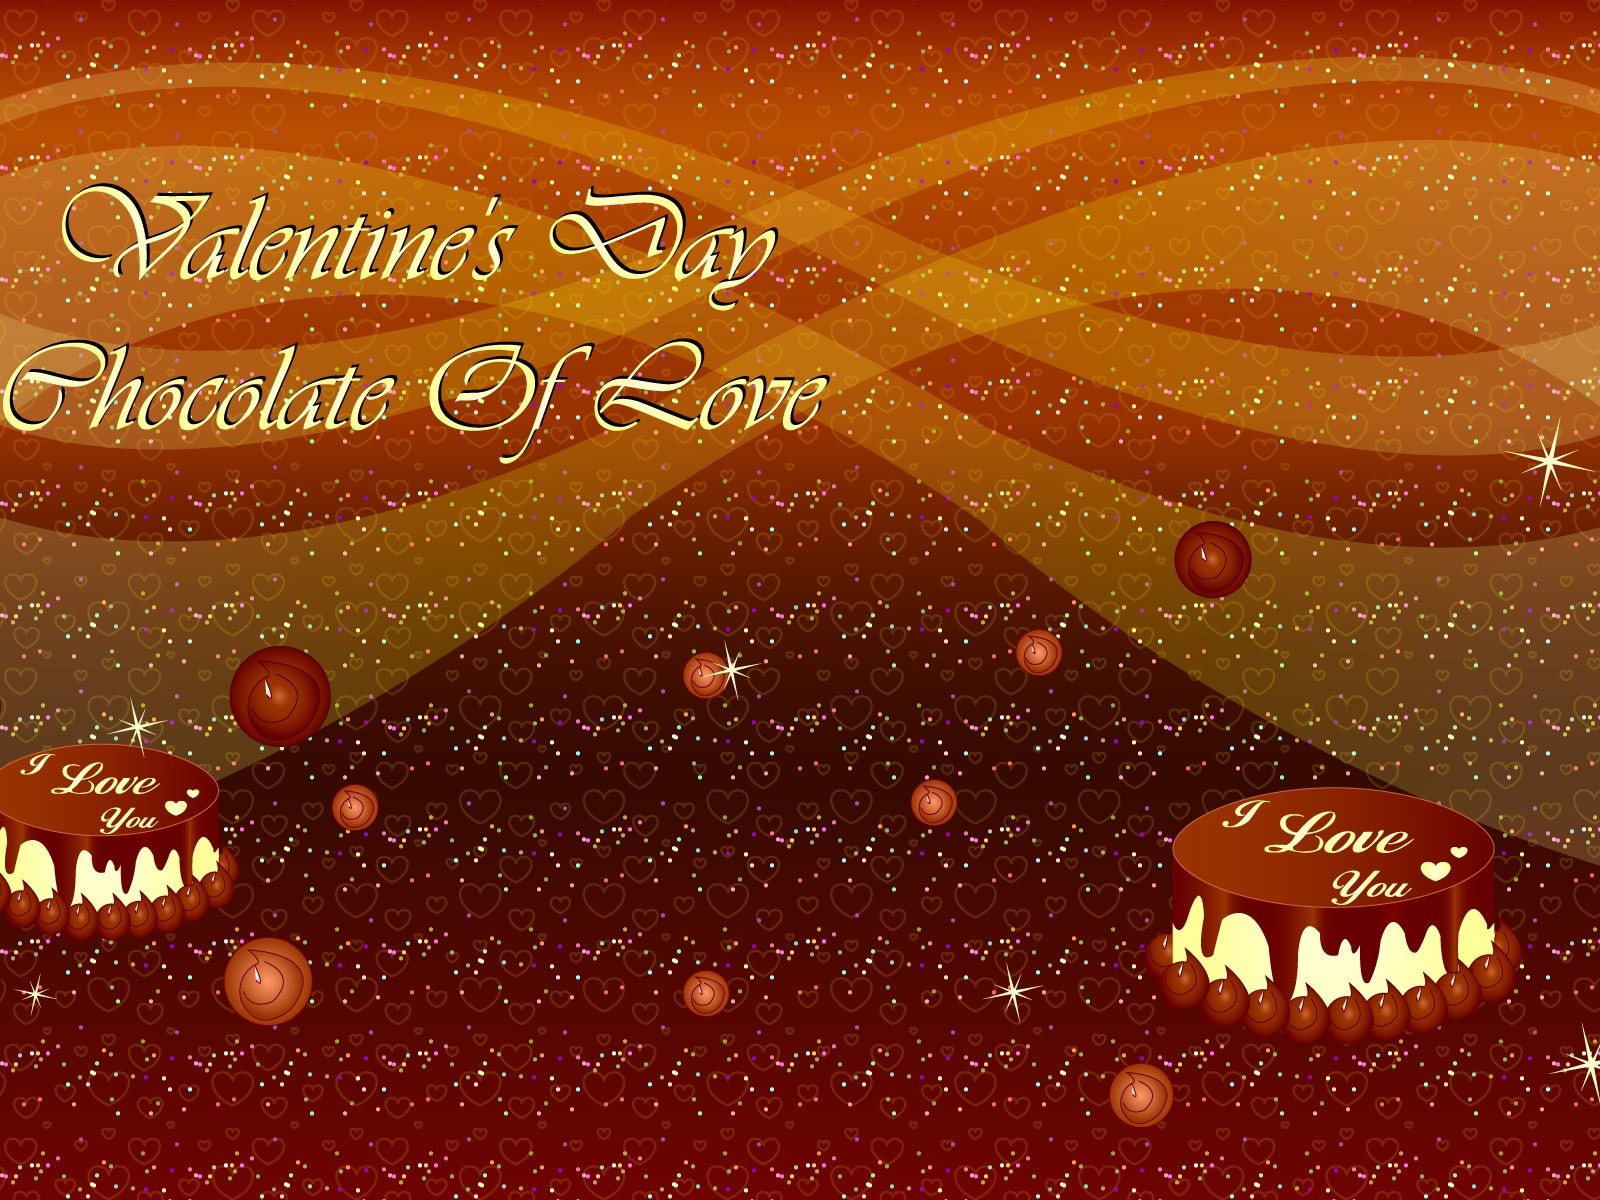 Valentine's Day Theme Wallpapers (2) #4 - 1600x1200